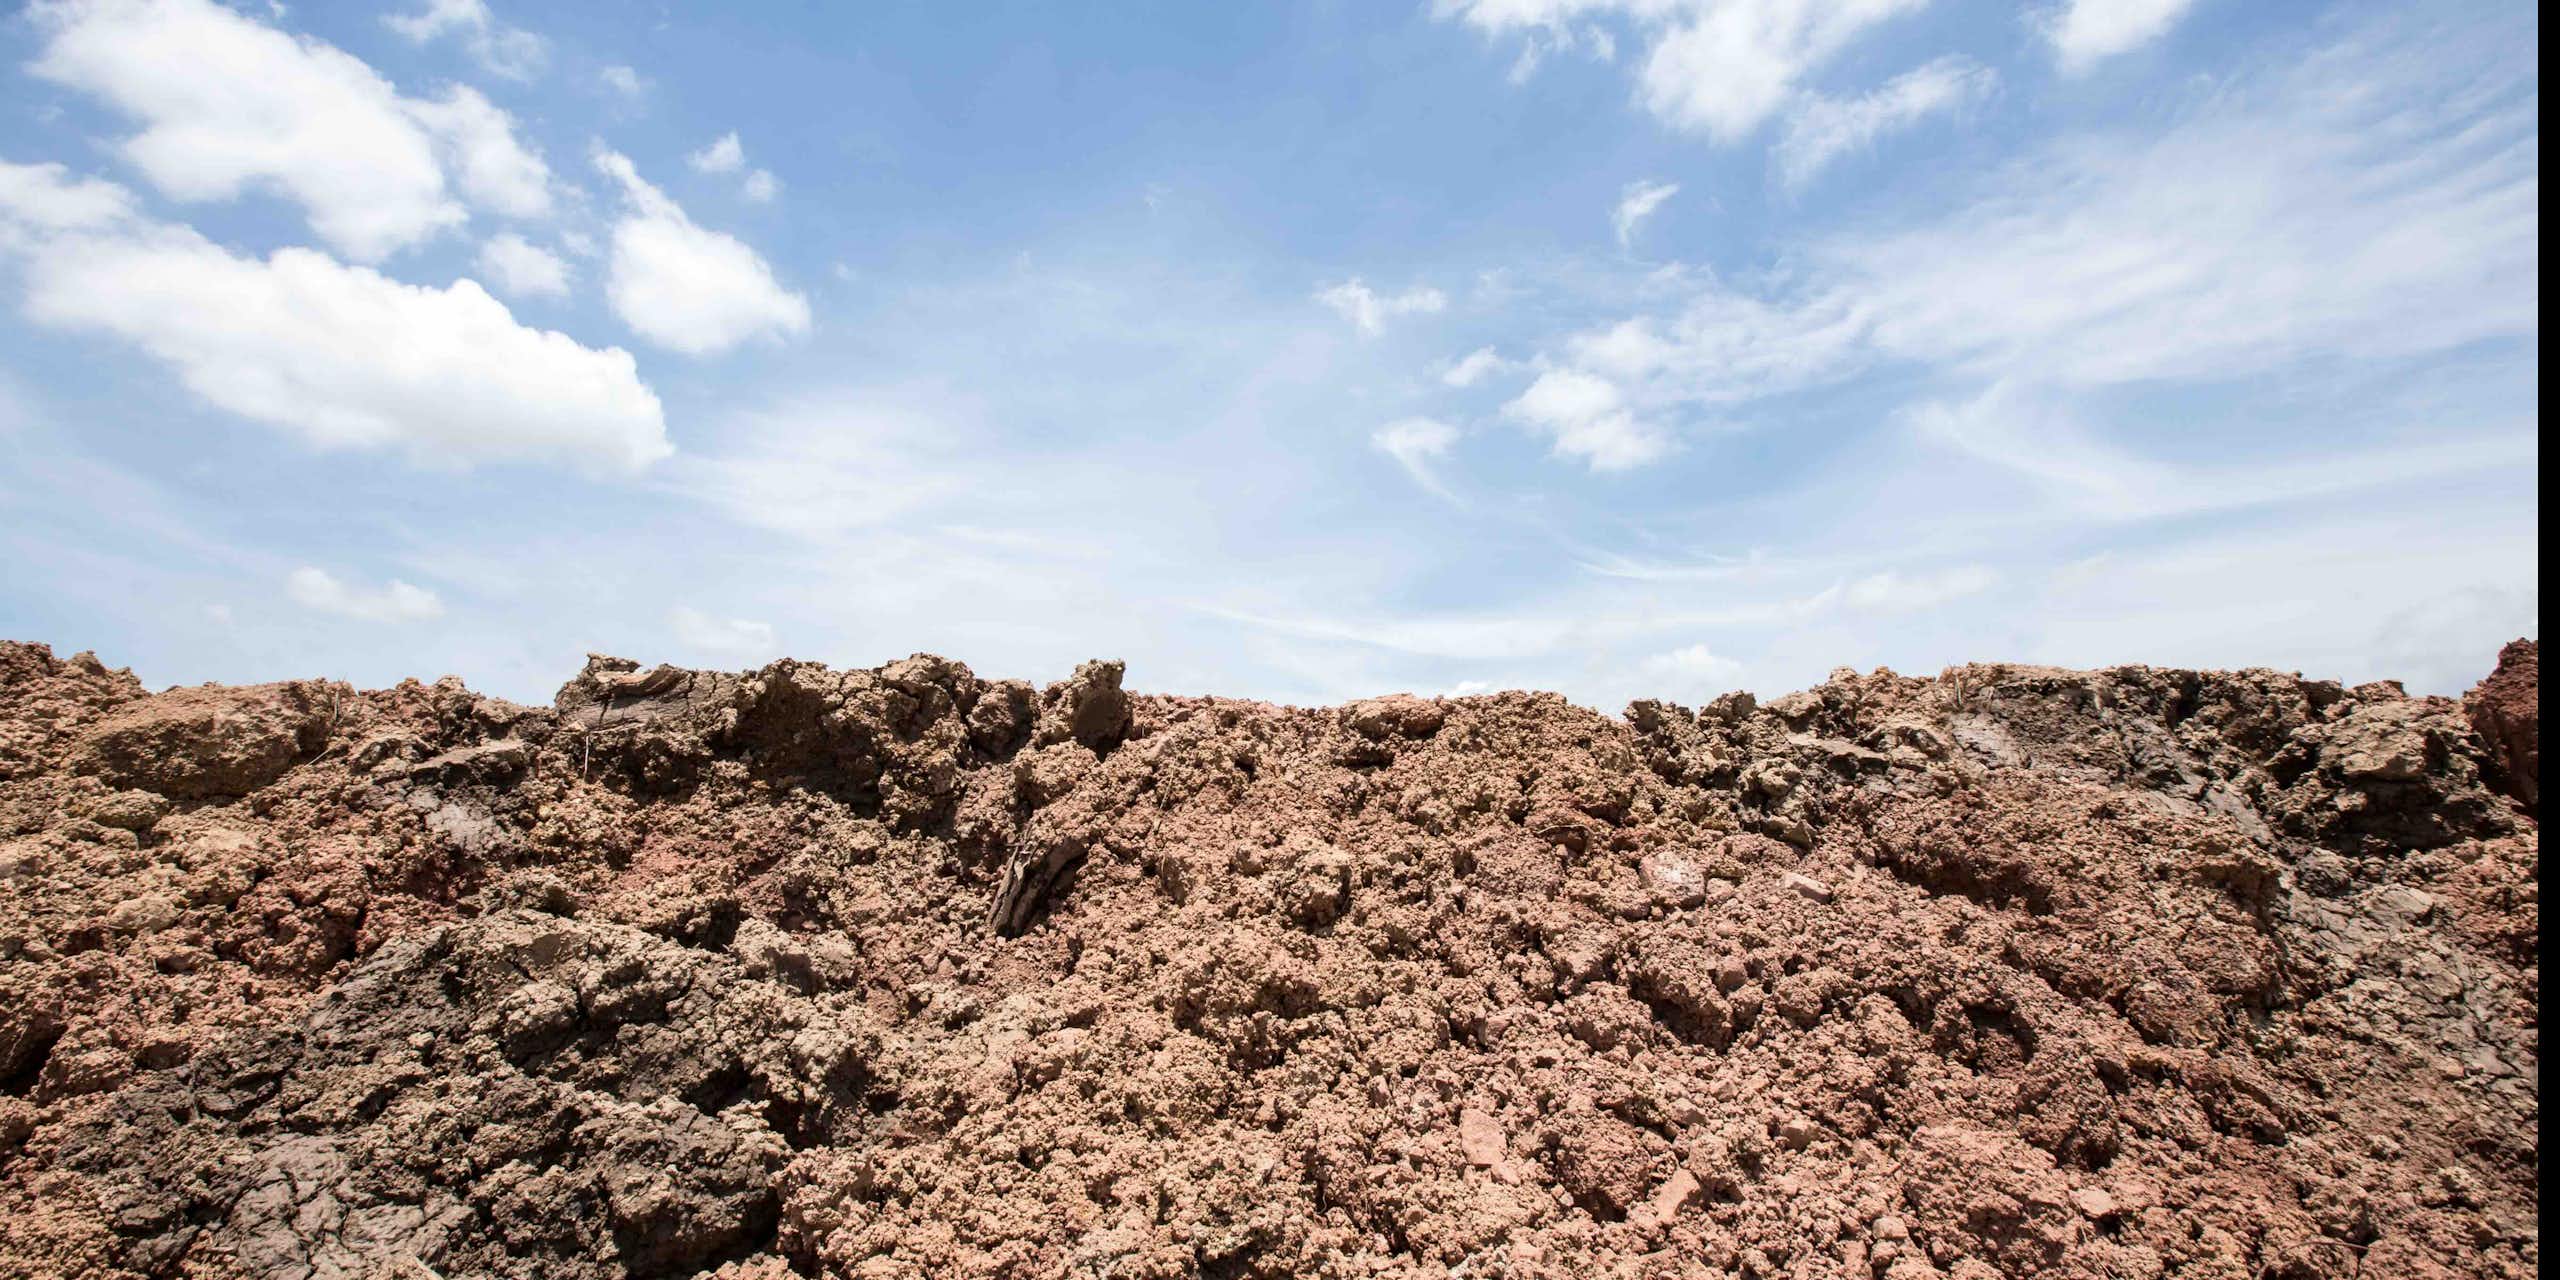 Photo showing disturbed soil beneath a blue sky with some white clouds.